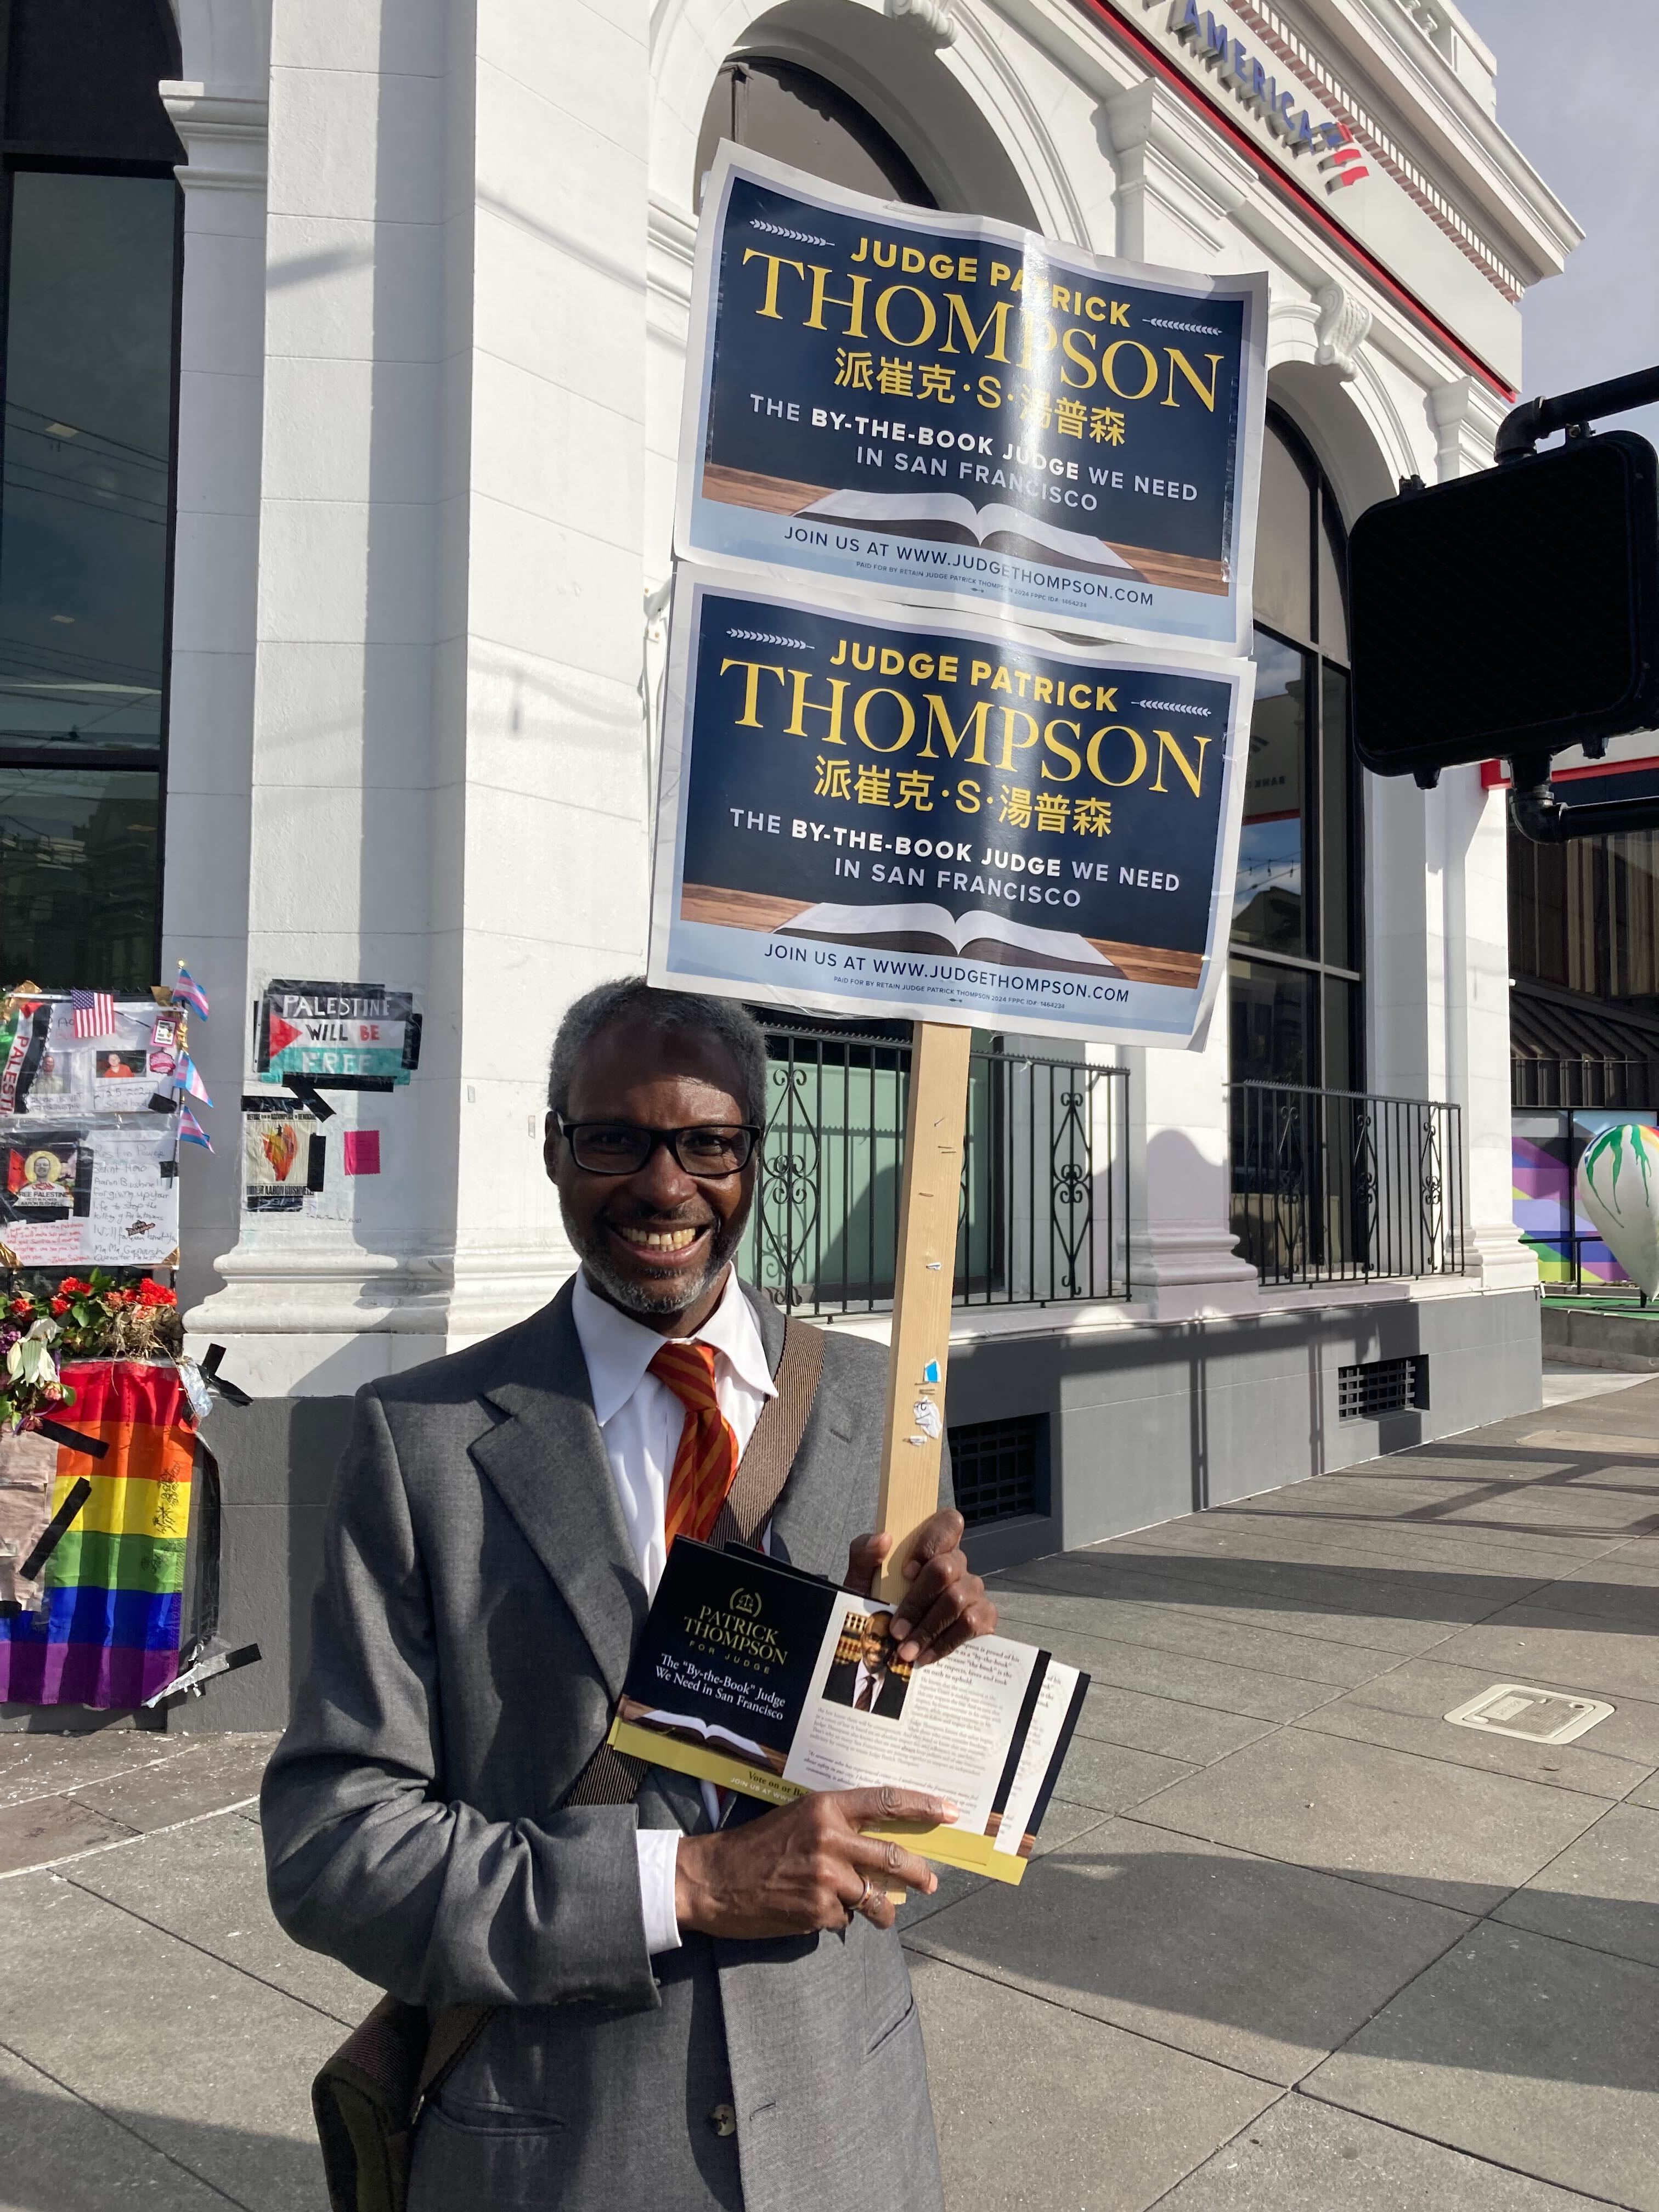 A man is smiling, holding campaign signs and a pamphlet promoting a judicial candidate. There's a pride flag in the background.